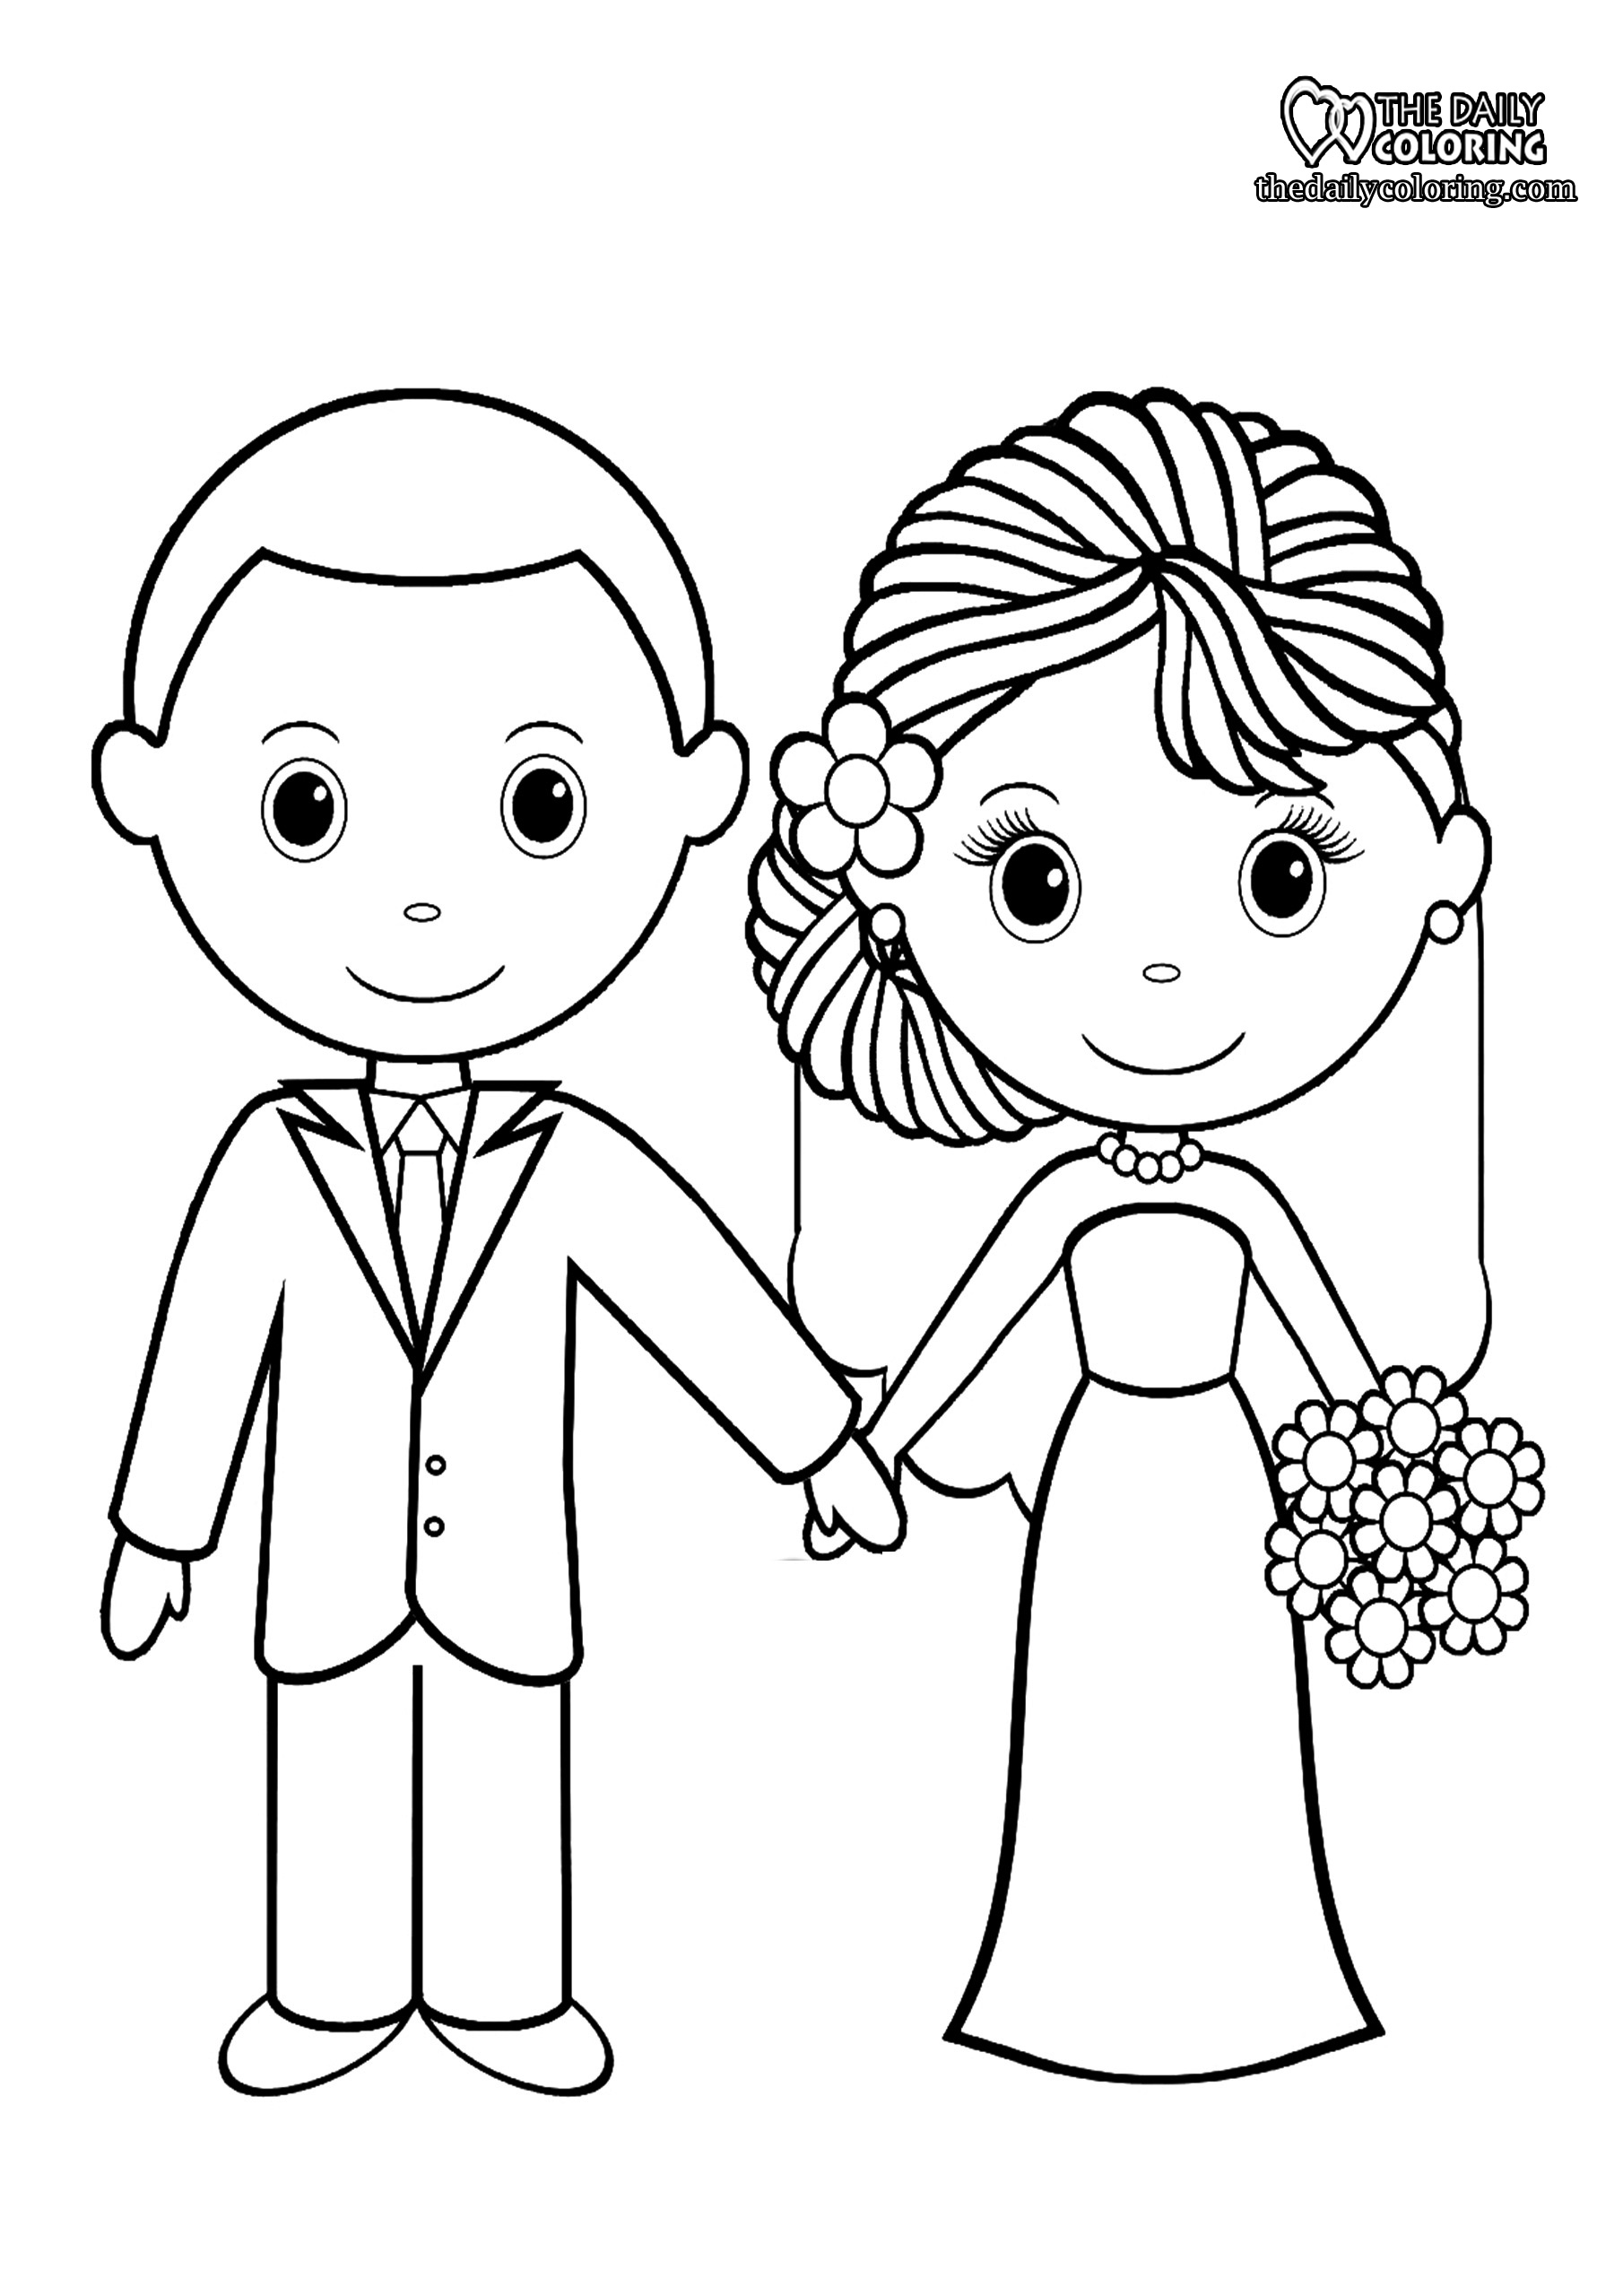 Wedding Coloring Pages - The Daily Coloring